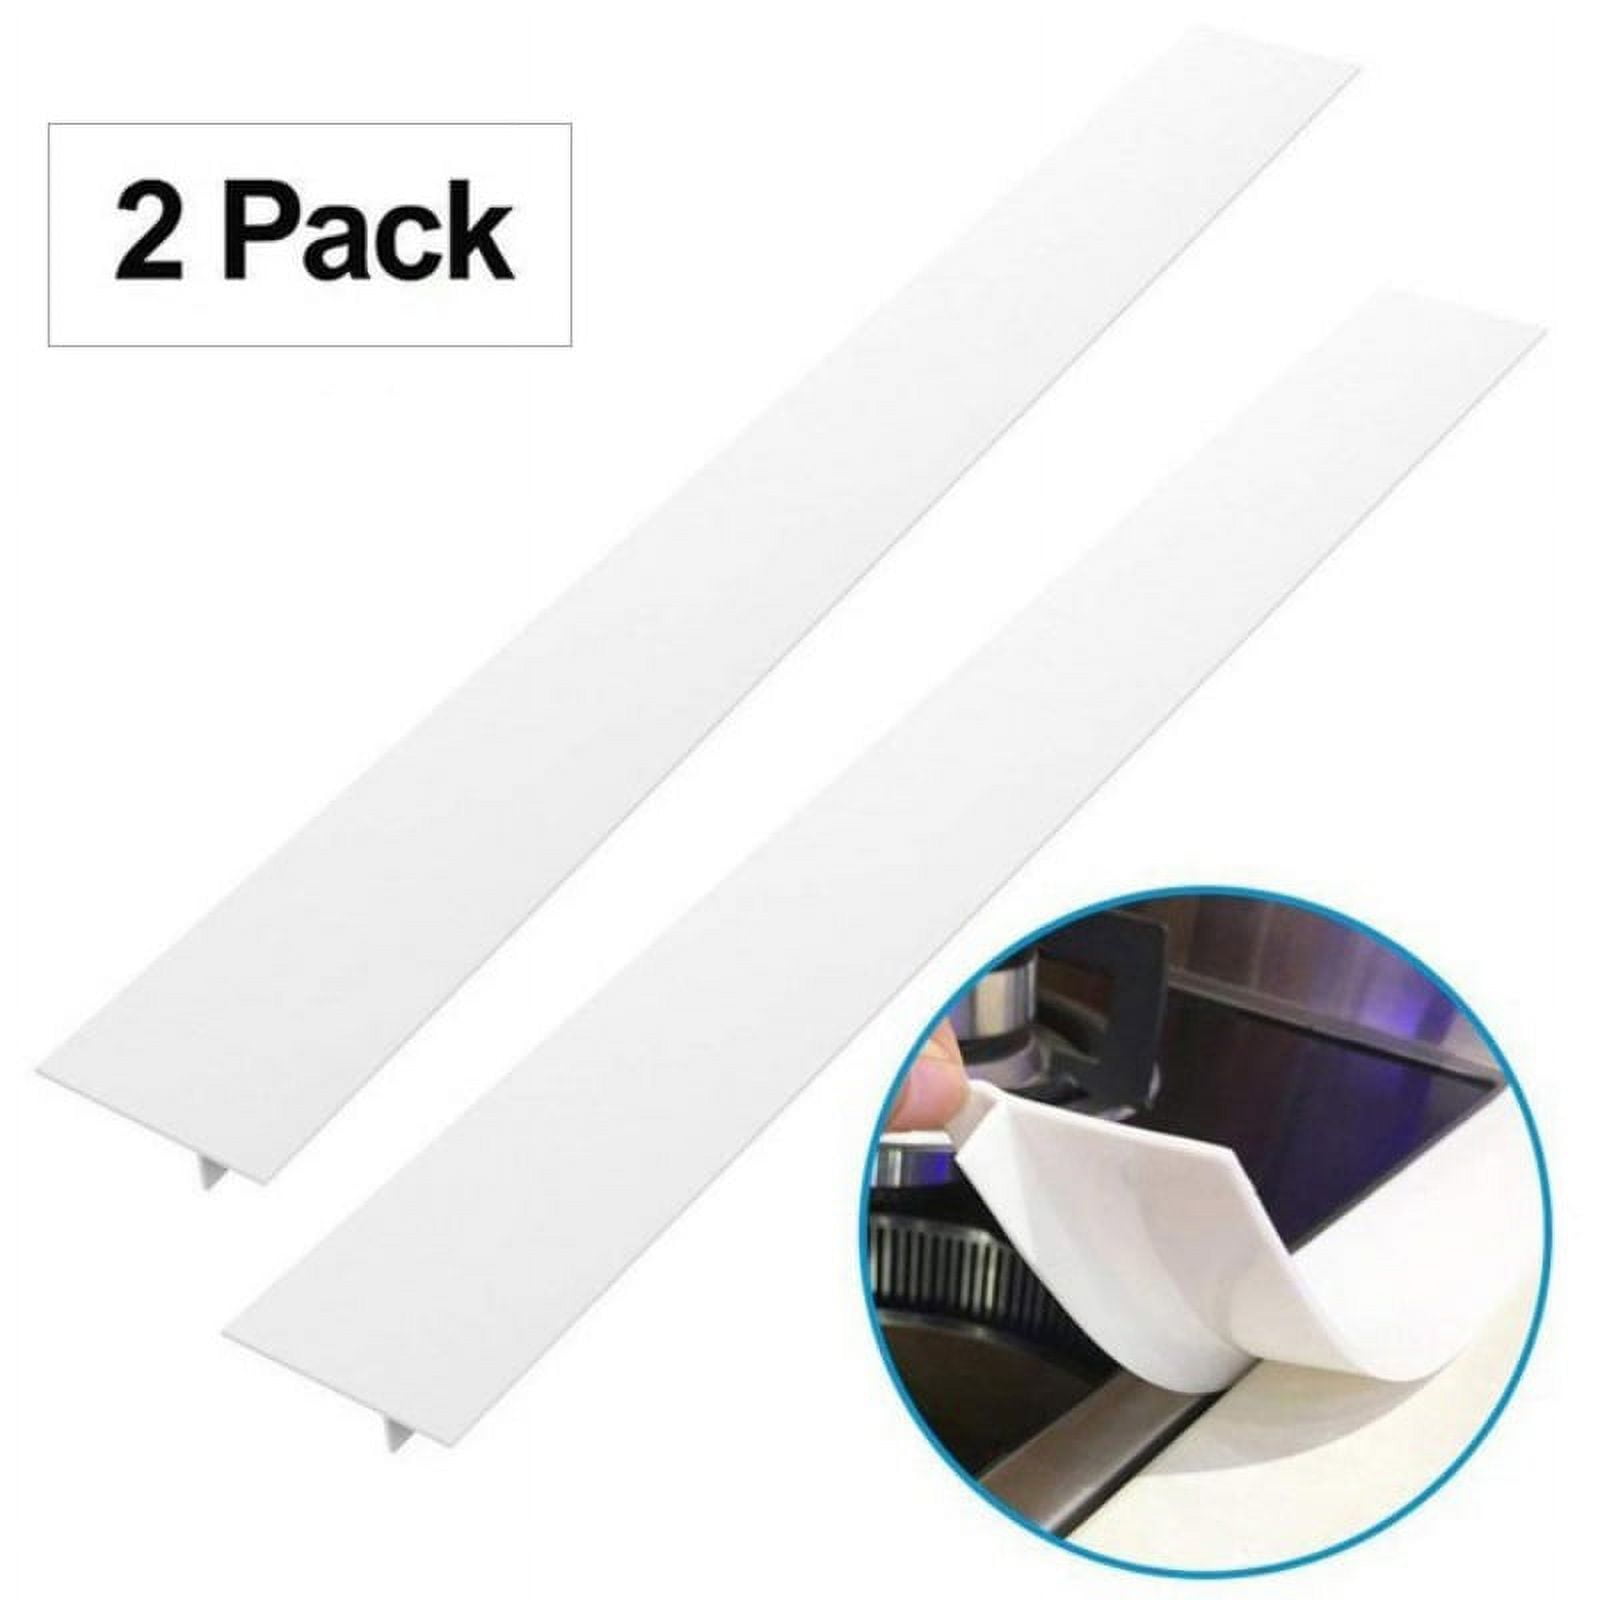  Silicone Stove Counter Gap Cover by Kindga, 21 Easy Clean Gap  Filler Sealing Spills Between Kitchen Counter, Appliances,Stovetop, Oven,  Washing Machine, Washer, Dryer Set of 2 (White): Home & Kitchen